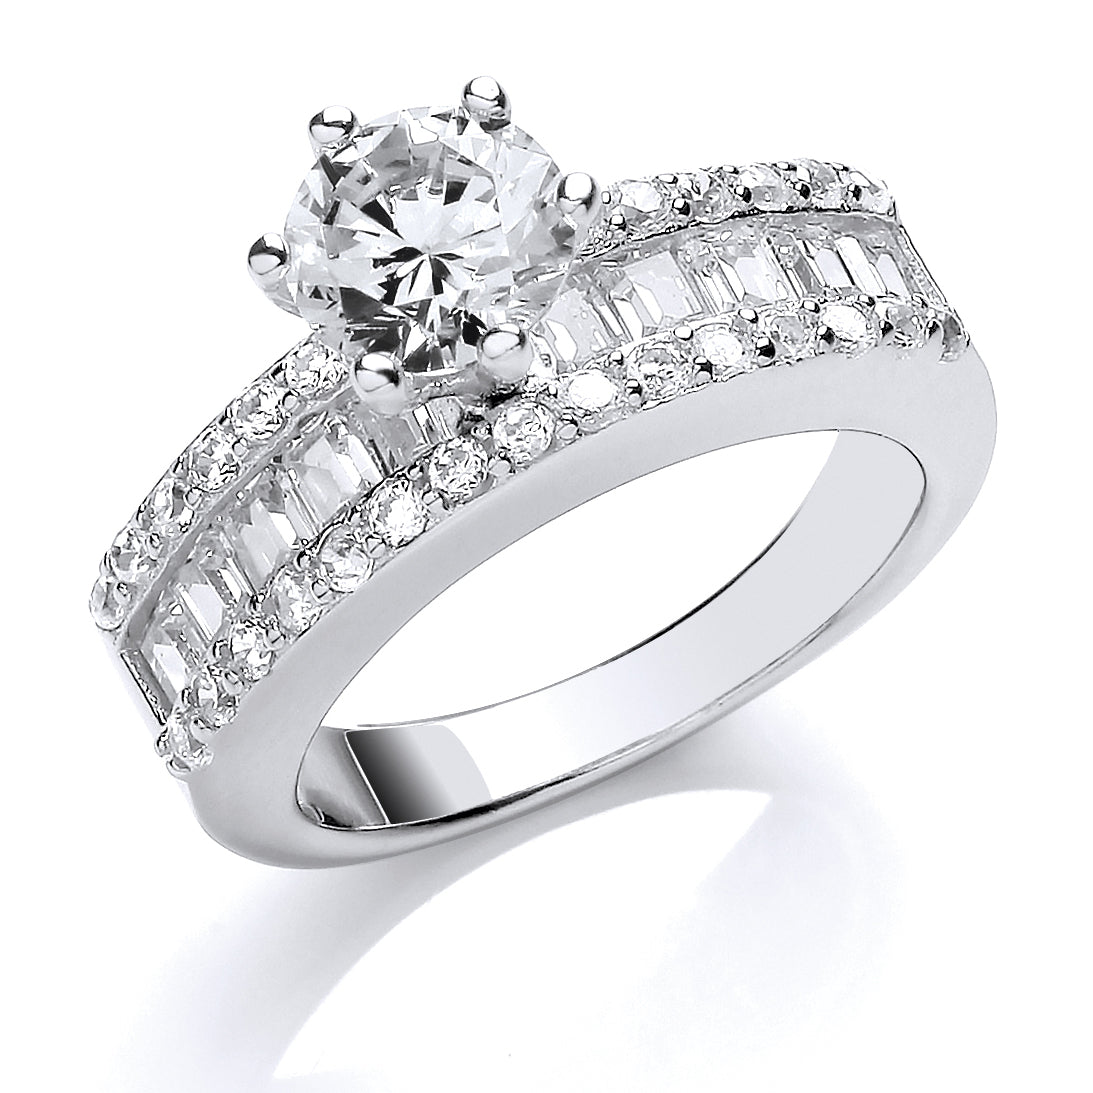 Silver  CZ Shoulder-Set 6 Claw Solitaire Engagement Ring - GVR675